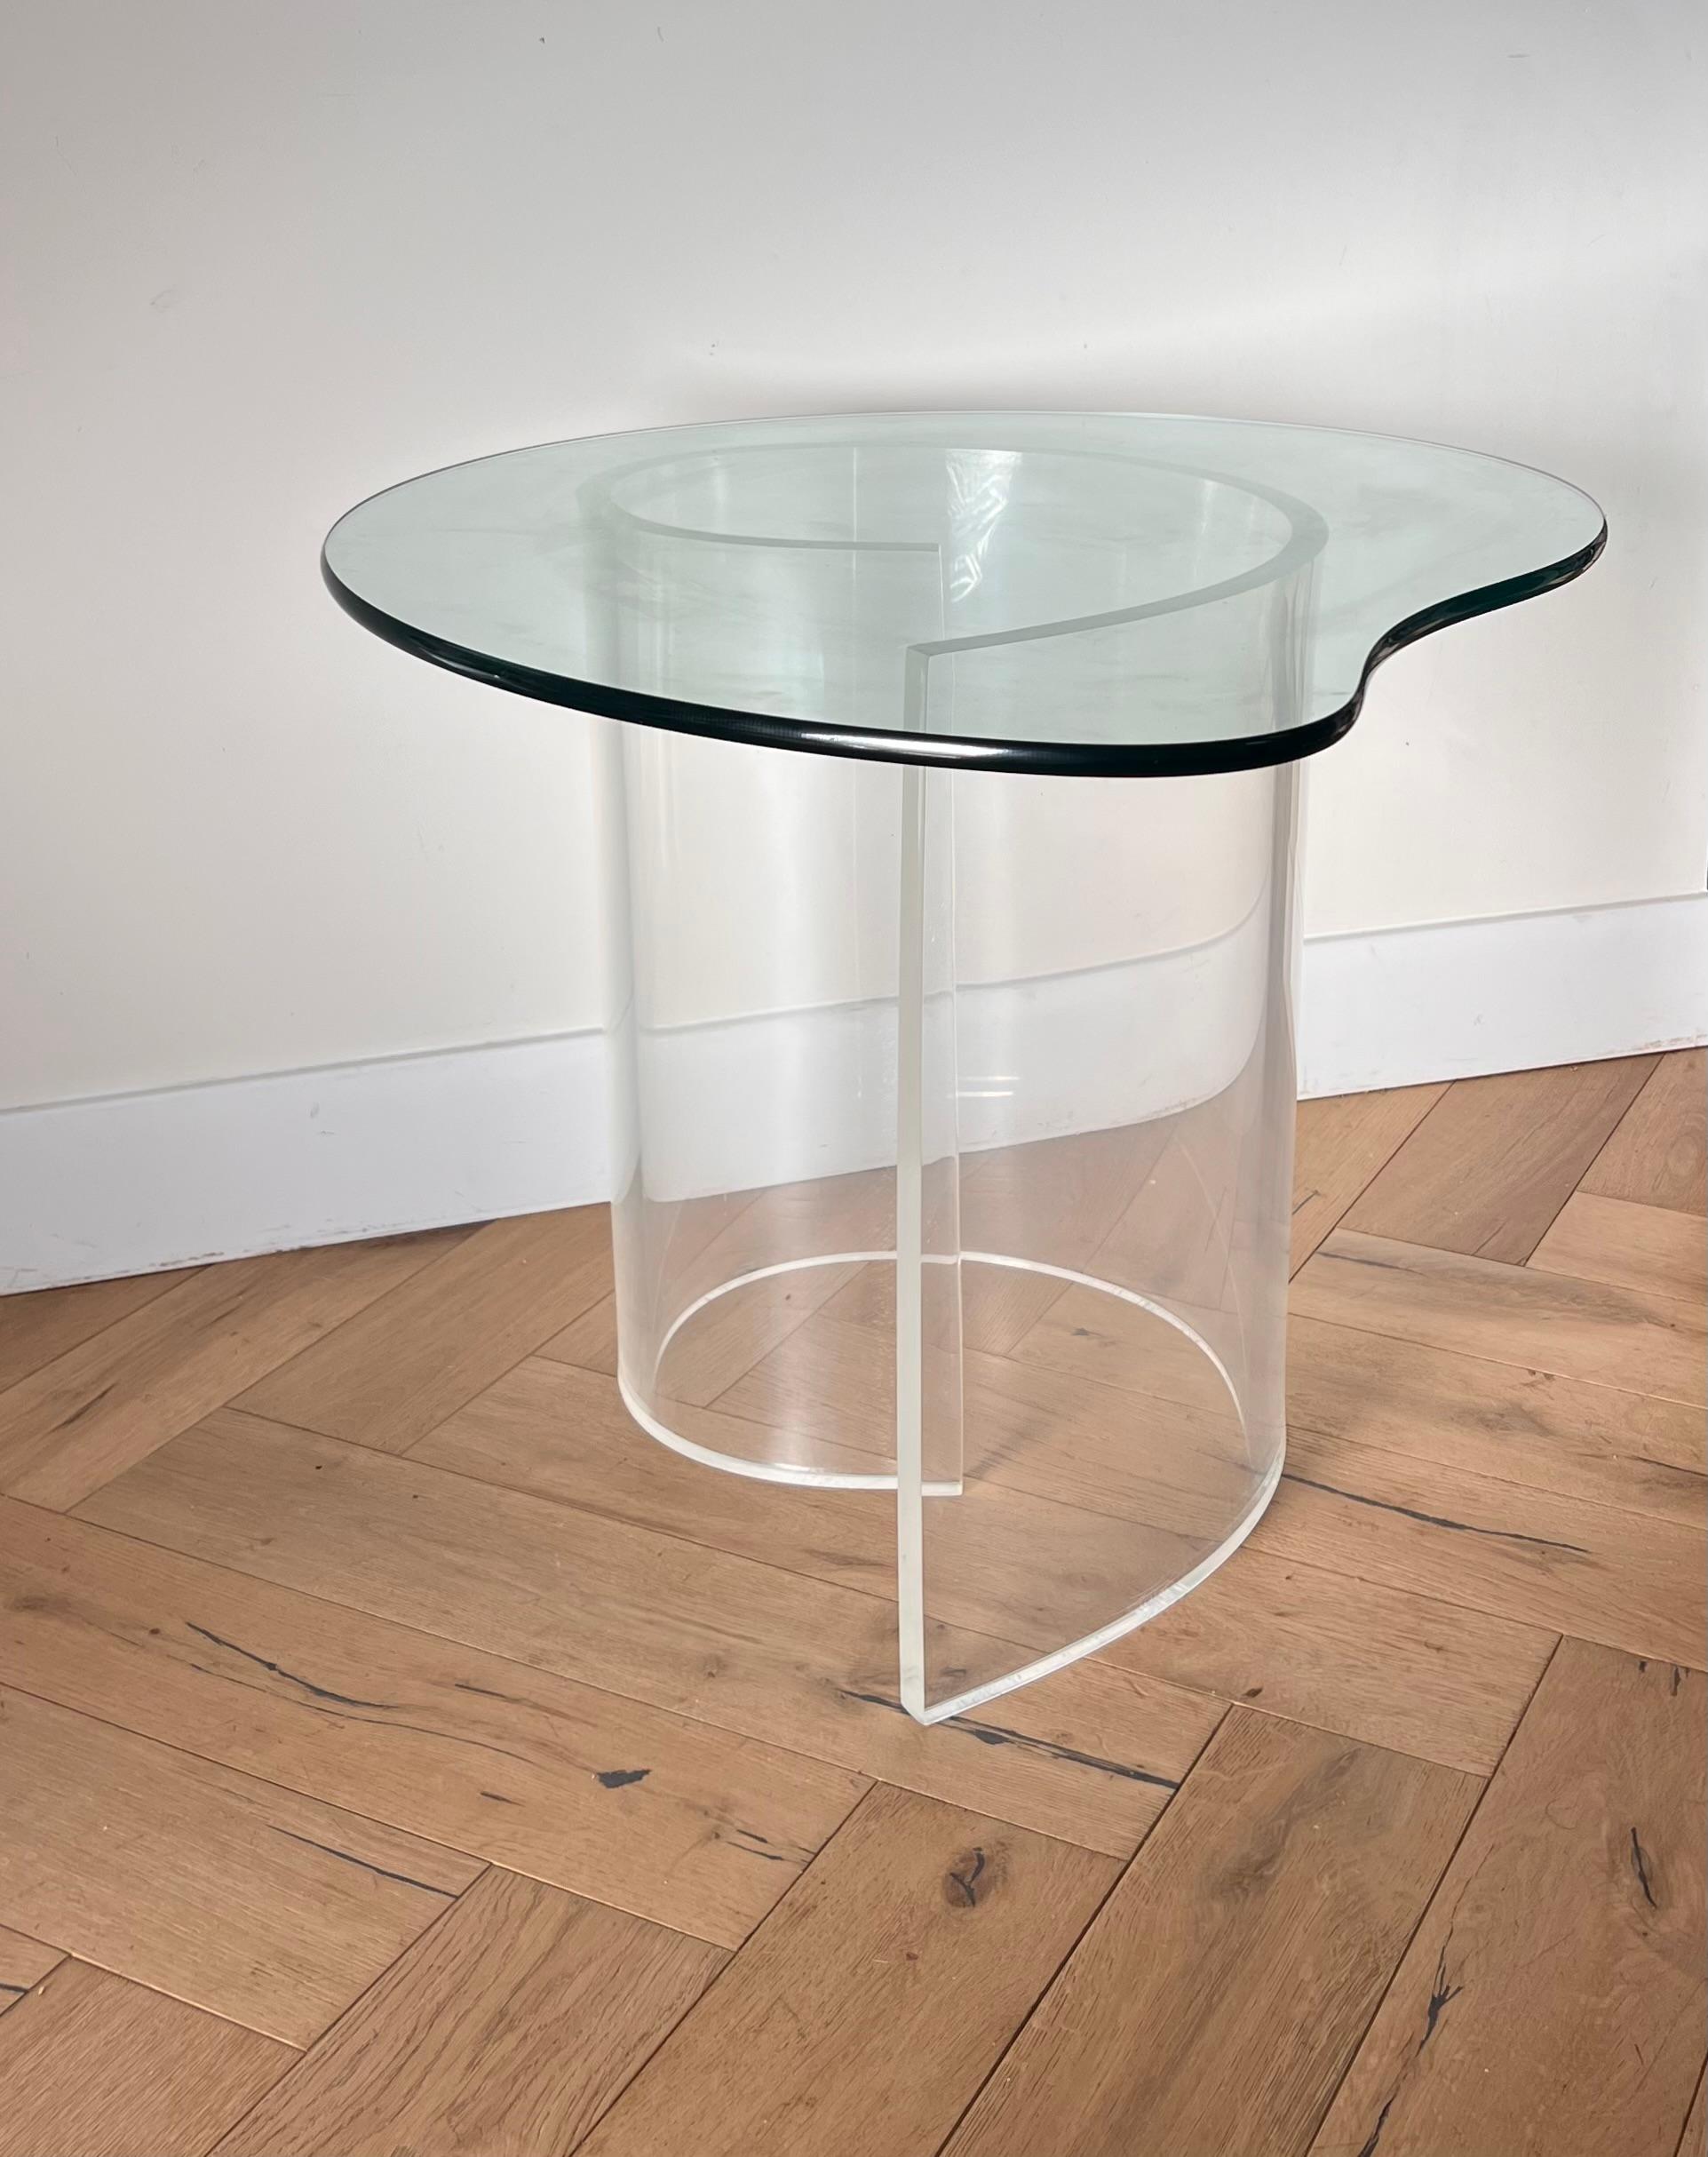 Late 20th Century Glass and lucite “Snail” table attr Vladimir Kagan, 1970s